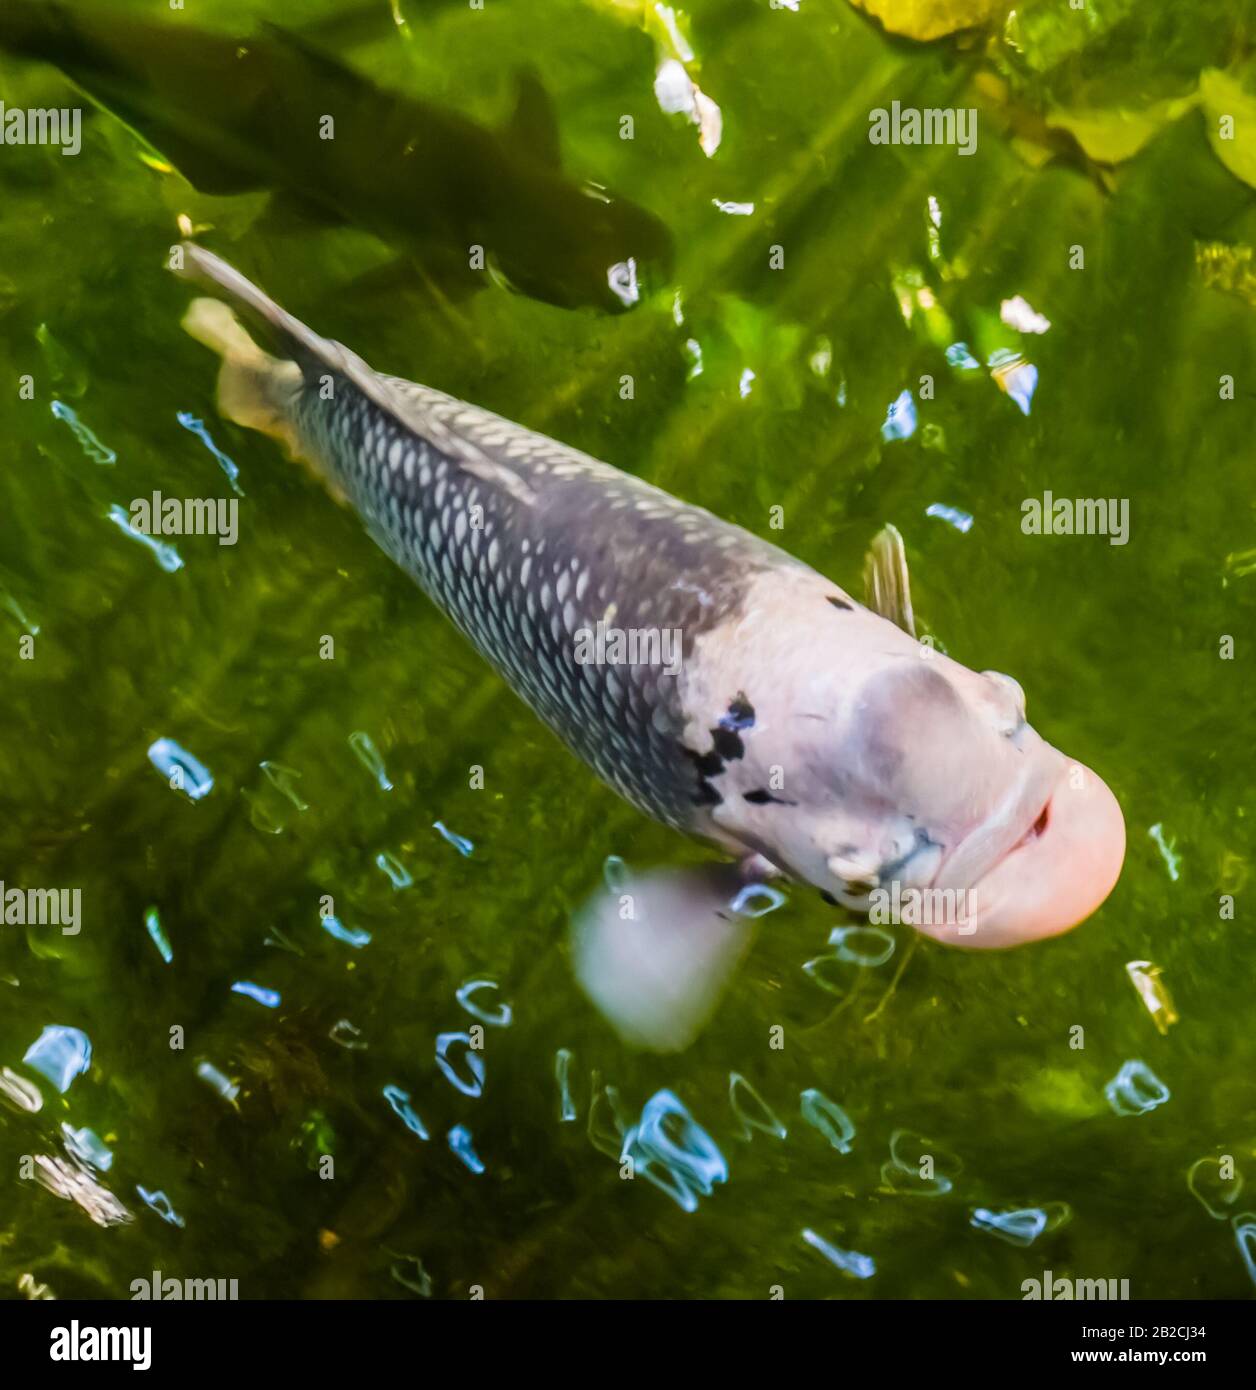 closeup of a giant gourami swimming in the water, popular tropical fish specie from Asia Stock Photo